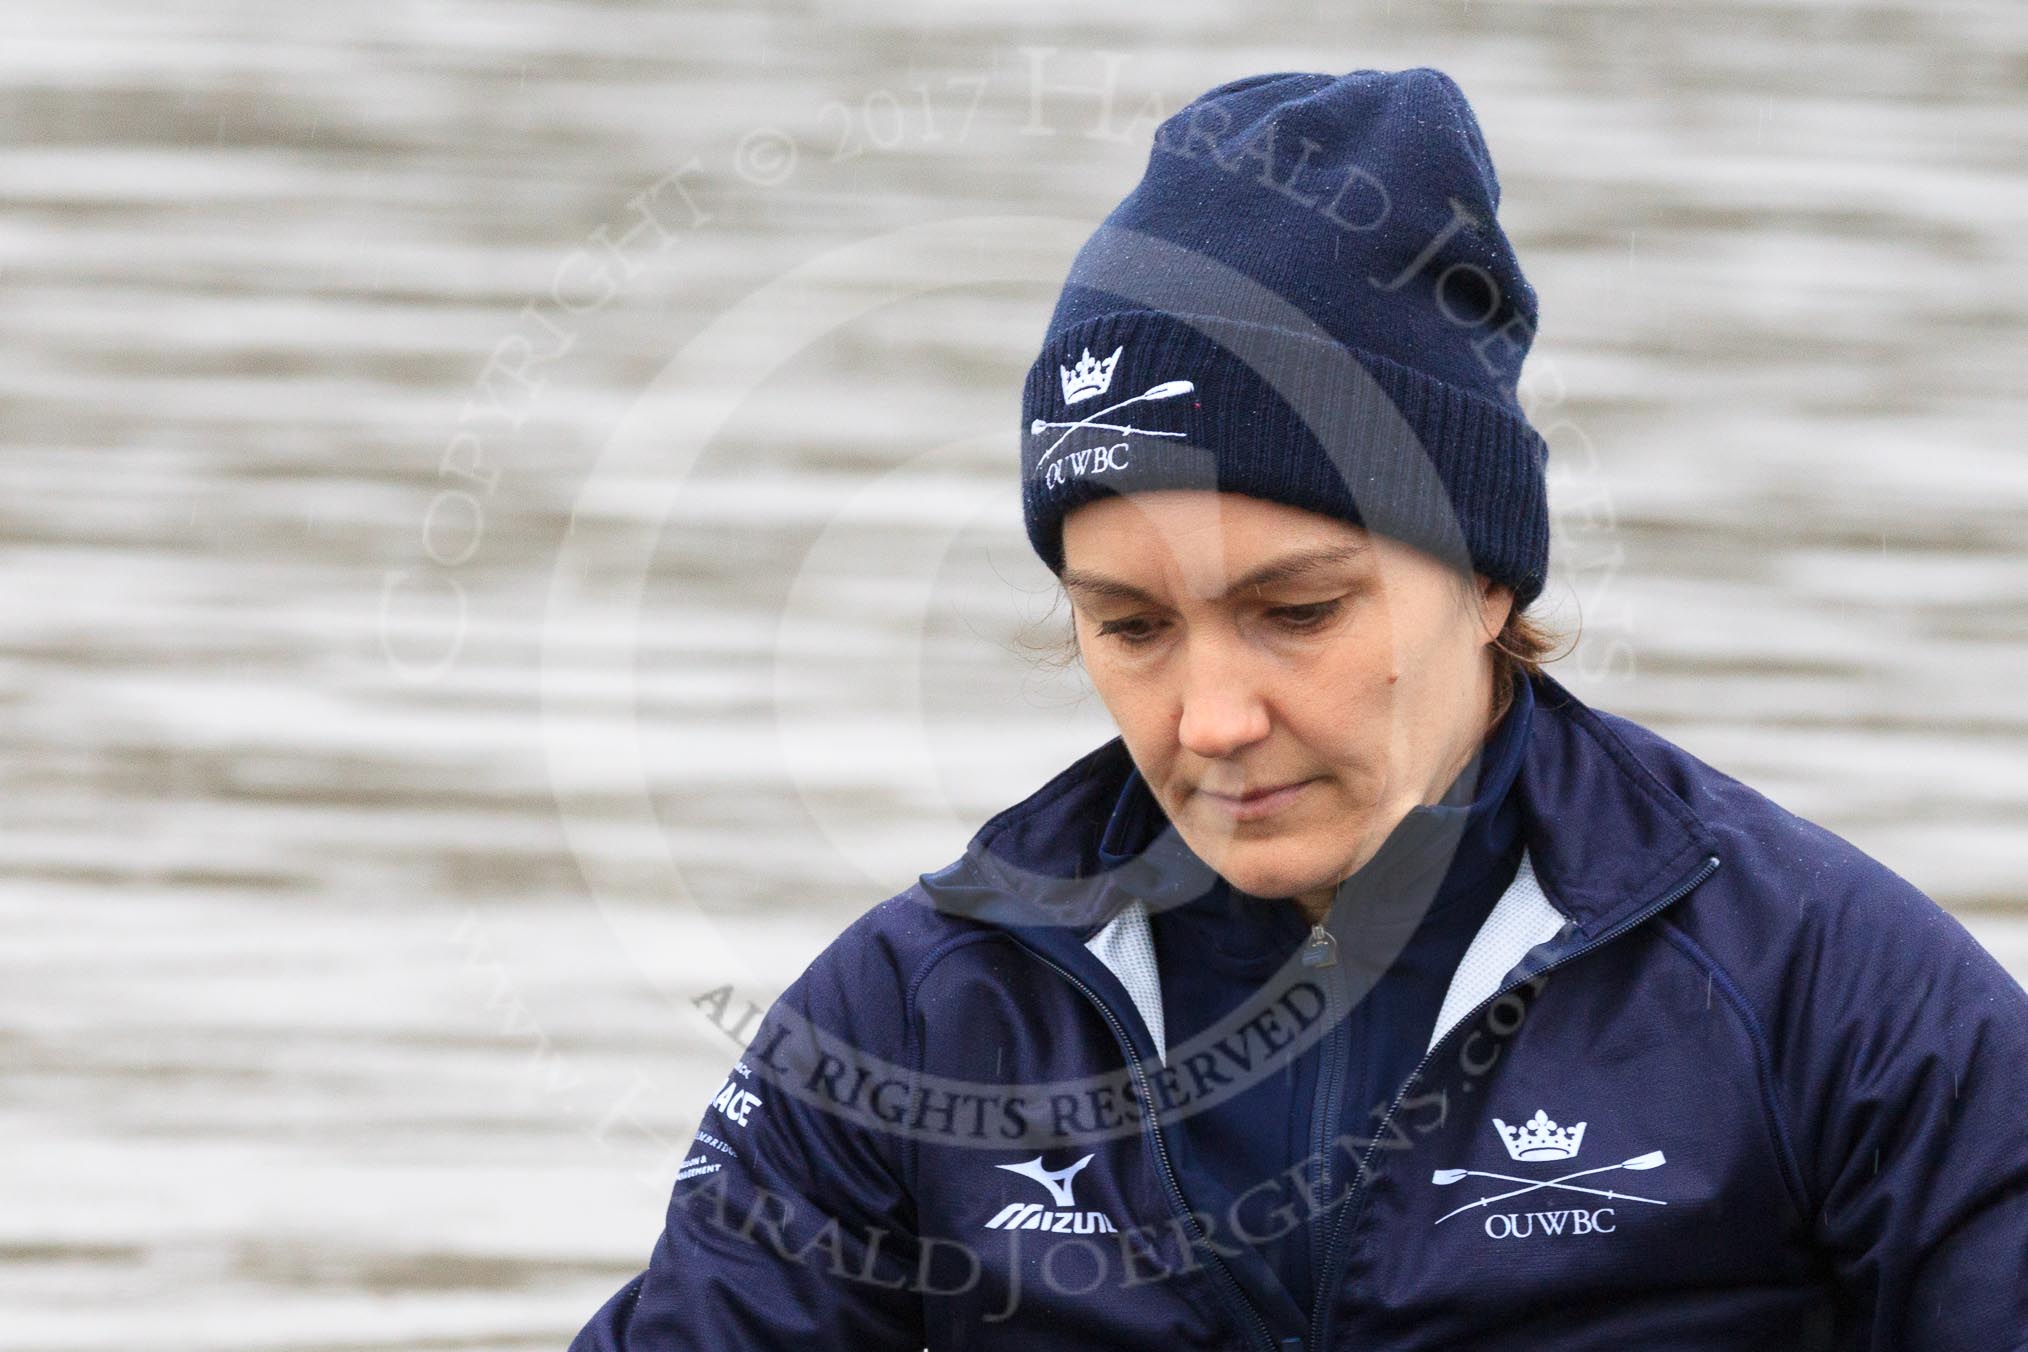 The Boat Race season 2018 - Women's Boat Race Trial Eights (OUWBC, Oxford): Close-up of "Coursing River" bow Sarah Payne-Riches.
River Thames between Putney Bridge and Mortlake,
London SW15,

United Kingdom,
on 21 January 2018 at 13:47, image #2